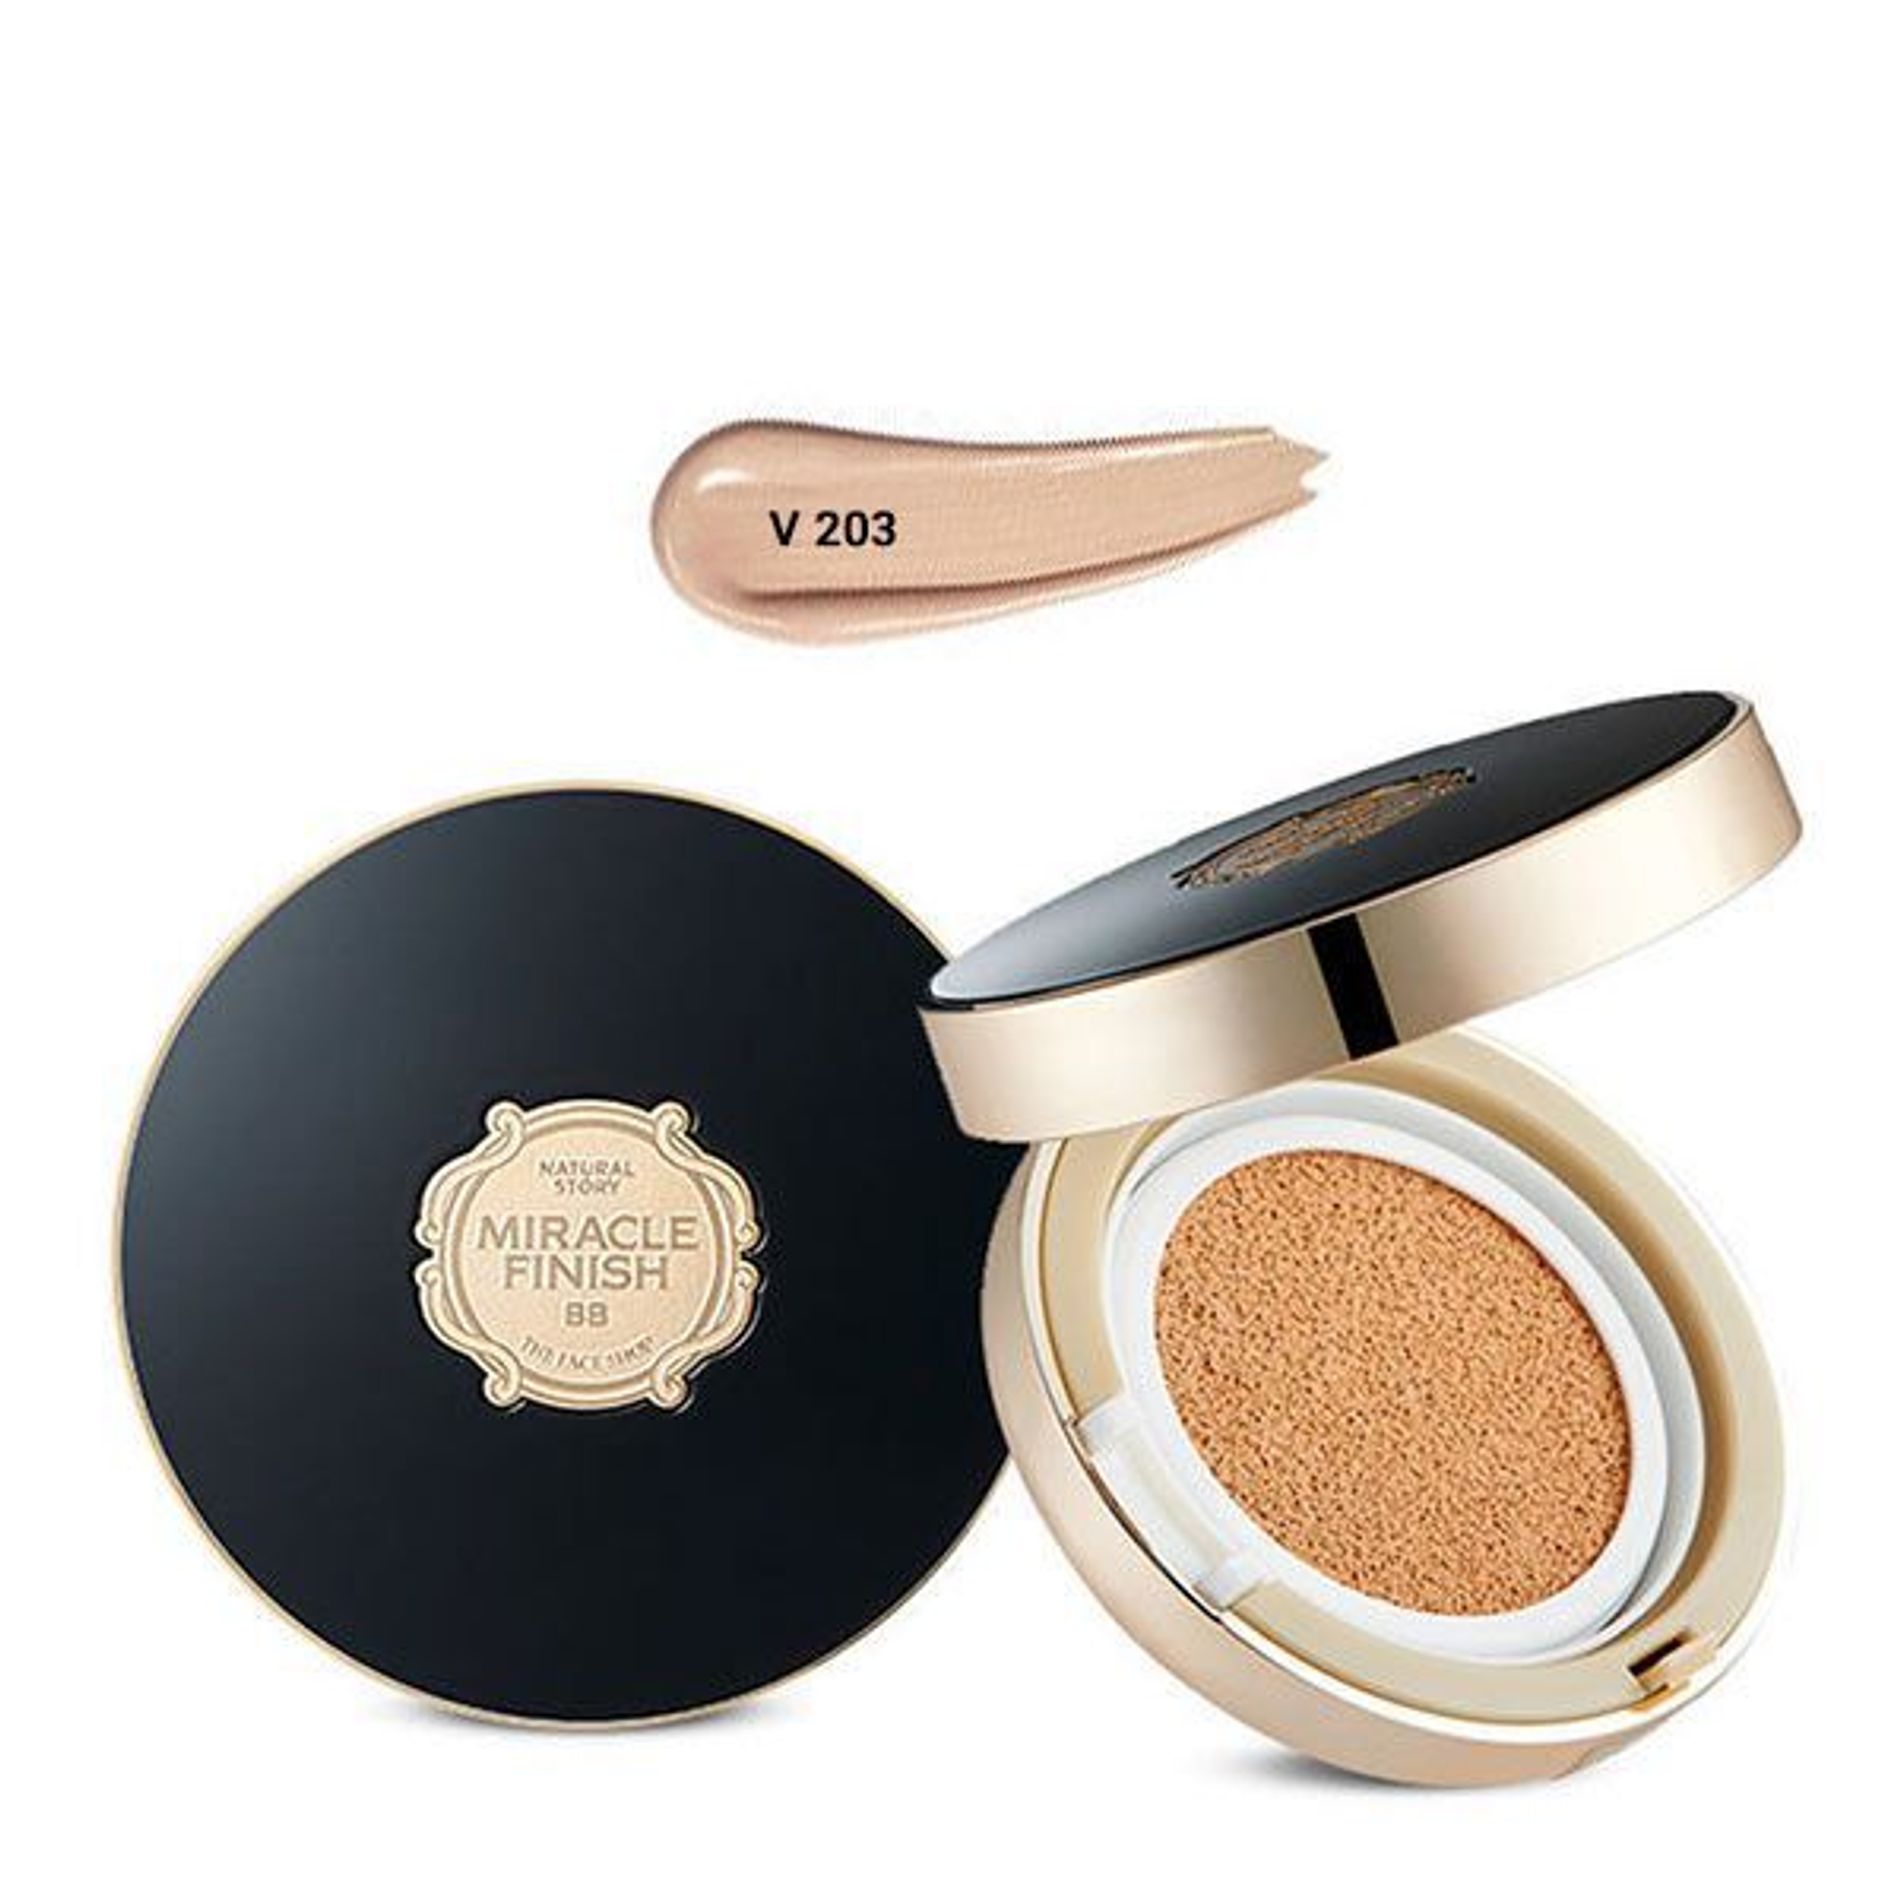 phan-nuoc-che-khuyet-diem-miracle-finish-bb-power-perfection-cushion-spf50-pa-v203-1-3